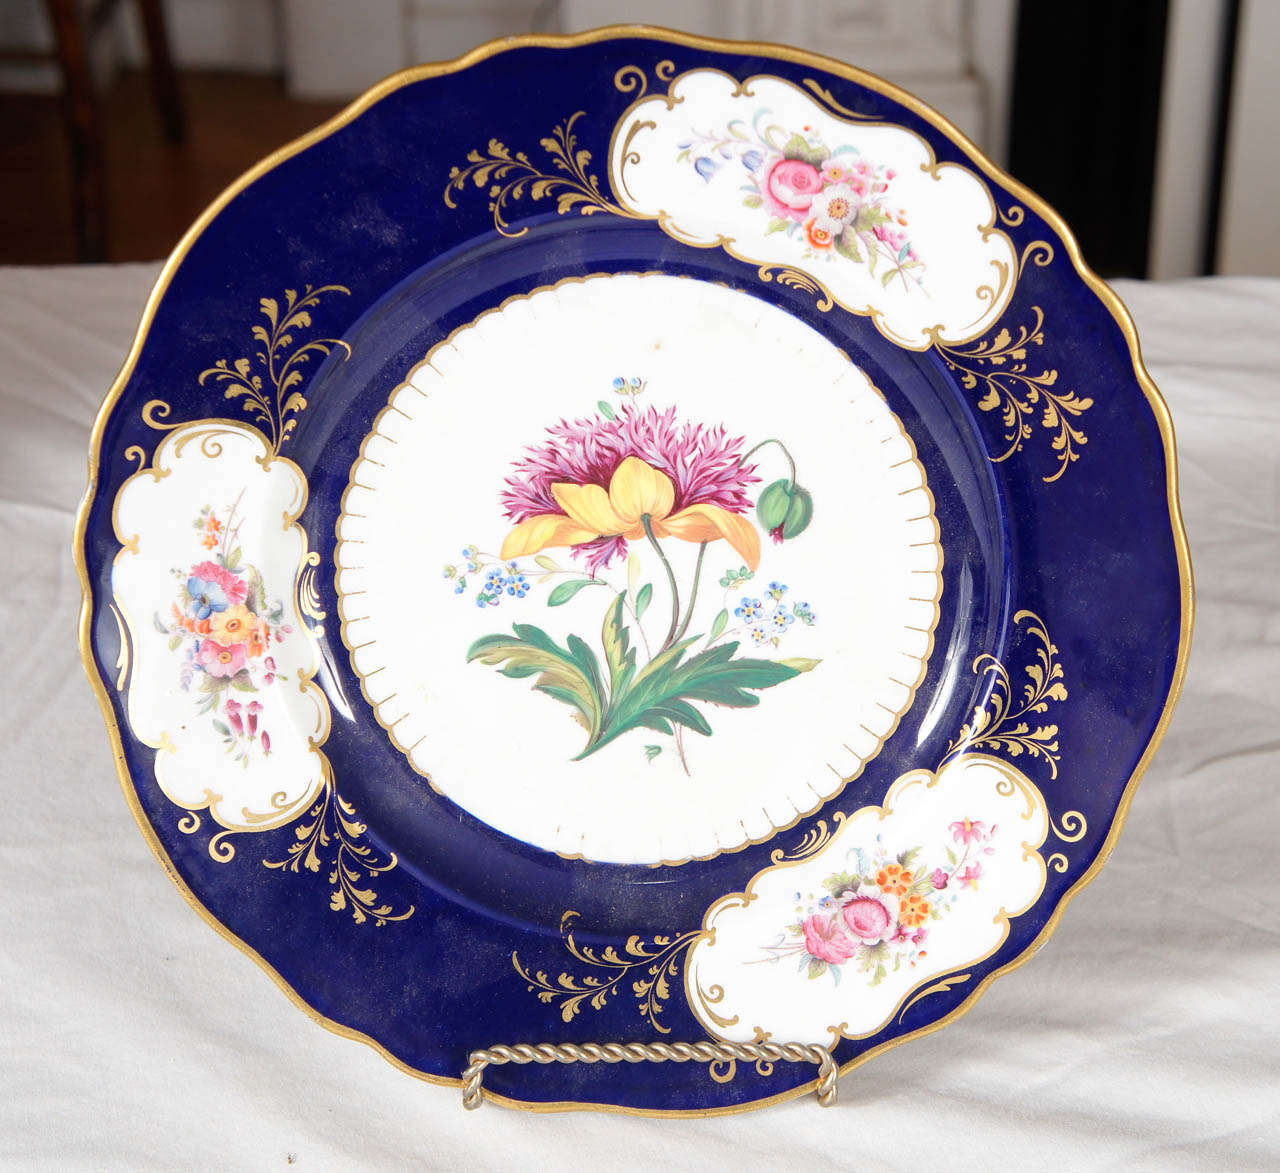 19th Century Similar Pair of Ridgway Porcelain Service Plates For Sale